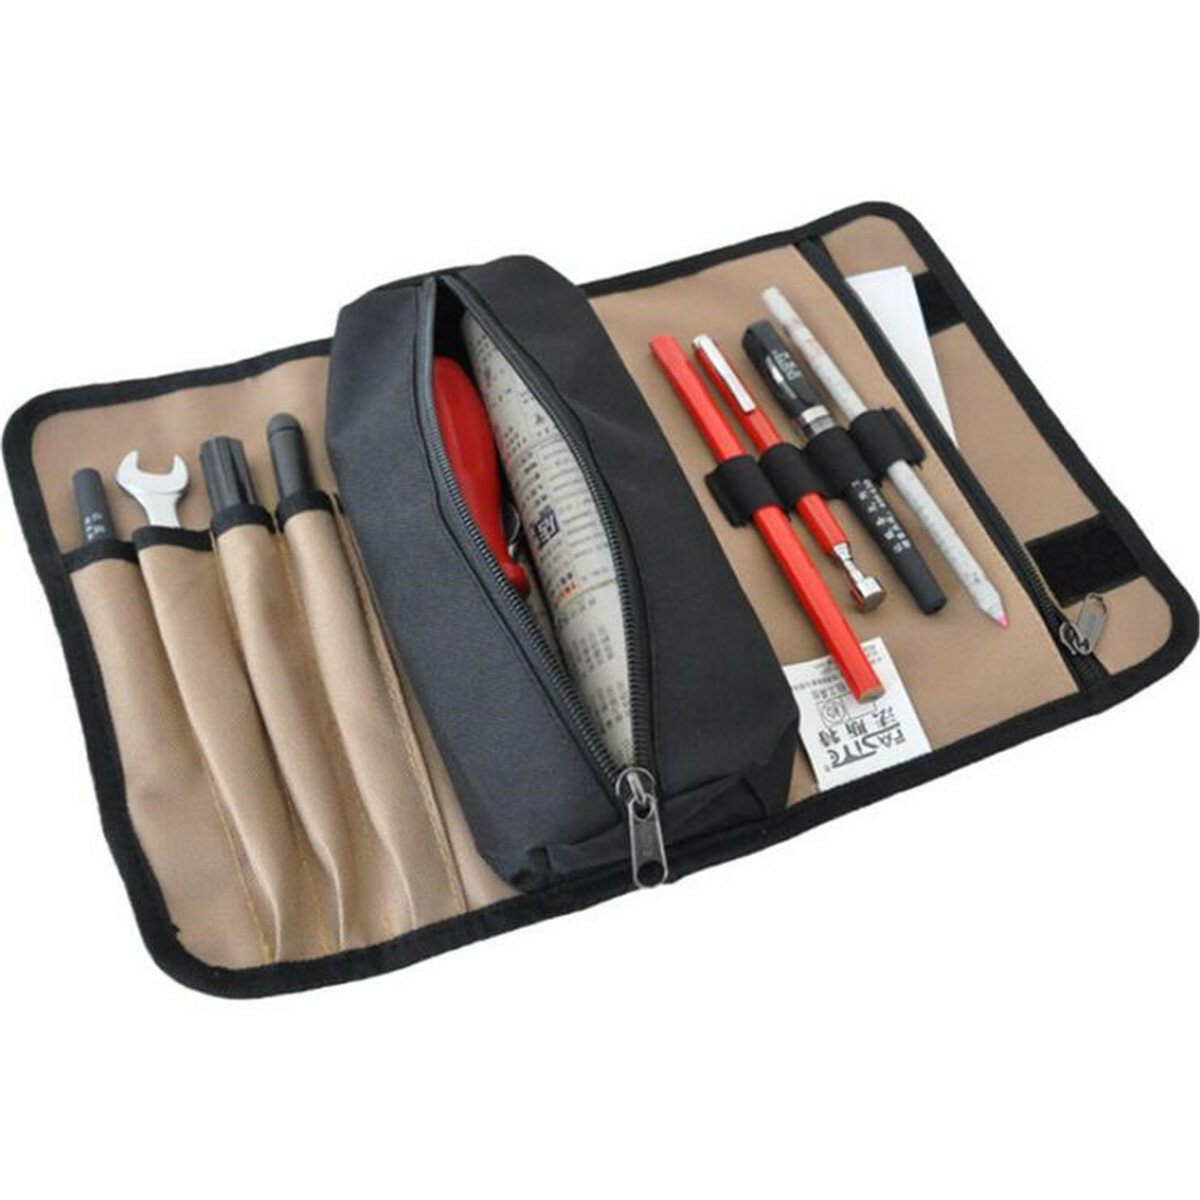 Oxford Roll Up Bag Wrench Screwdriver Tools Storage Bag Portable Organizer Bag Outdoor Camping Cycling